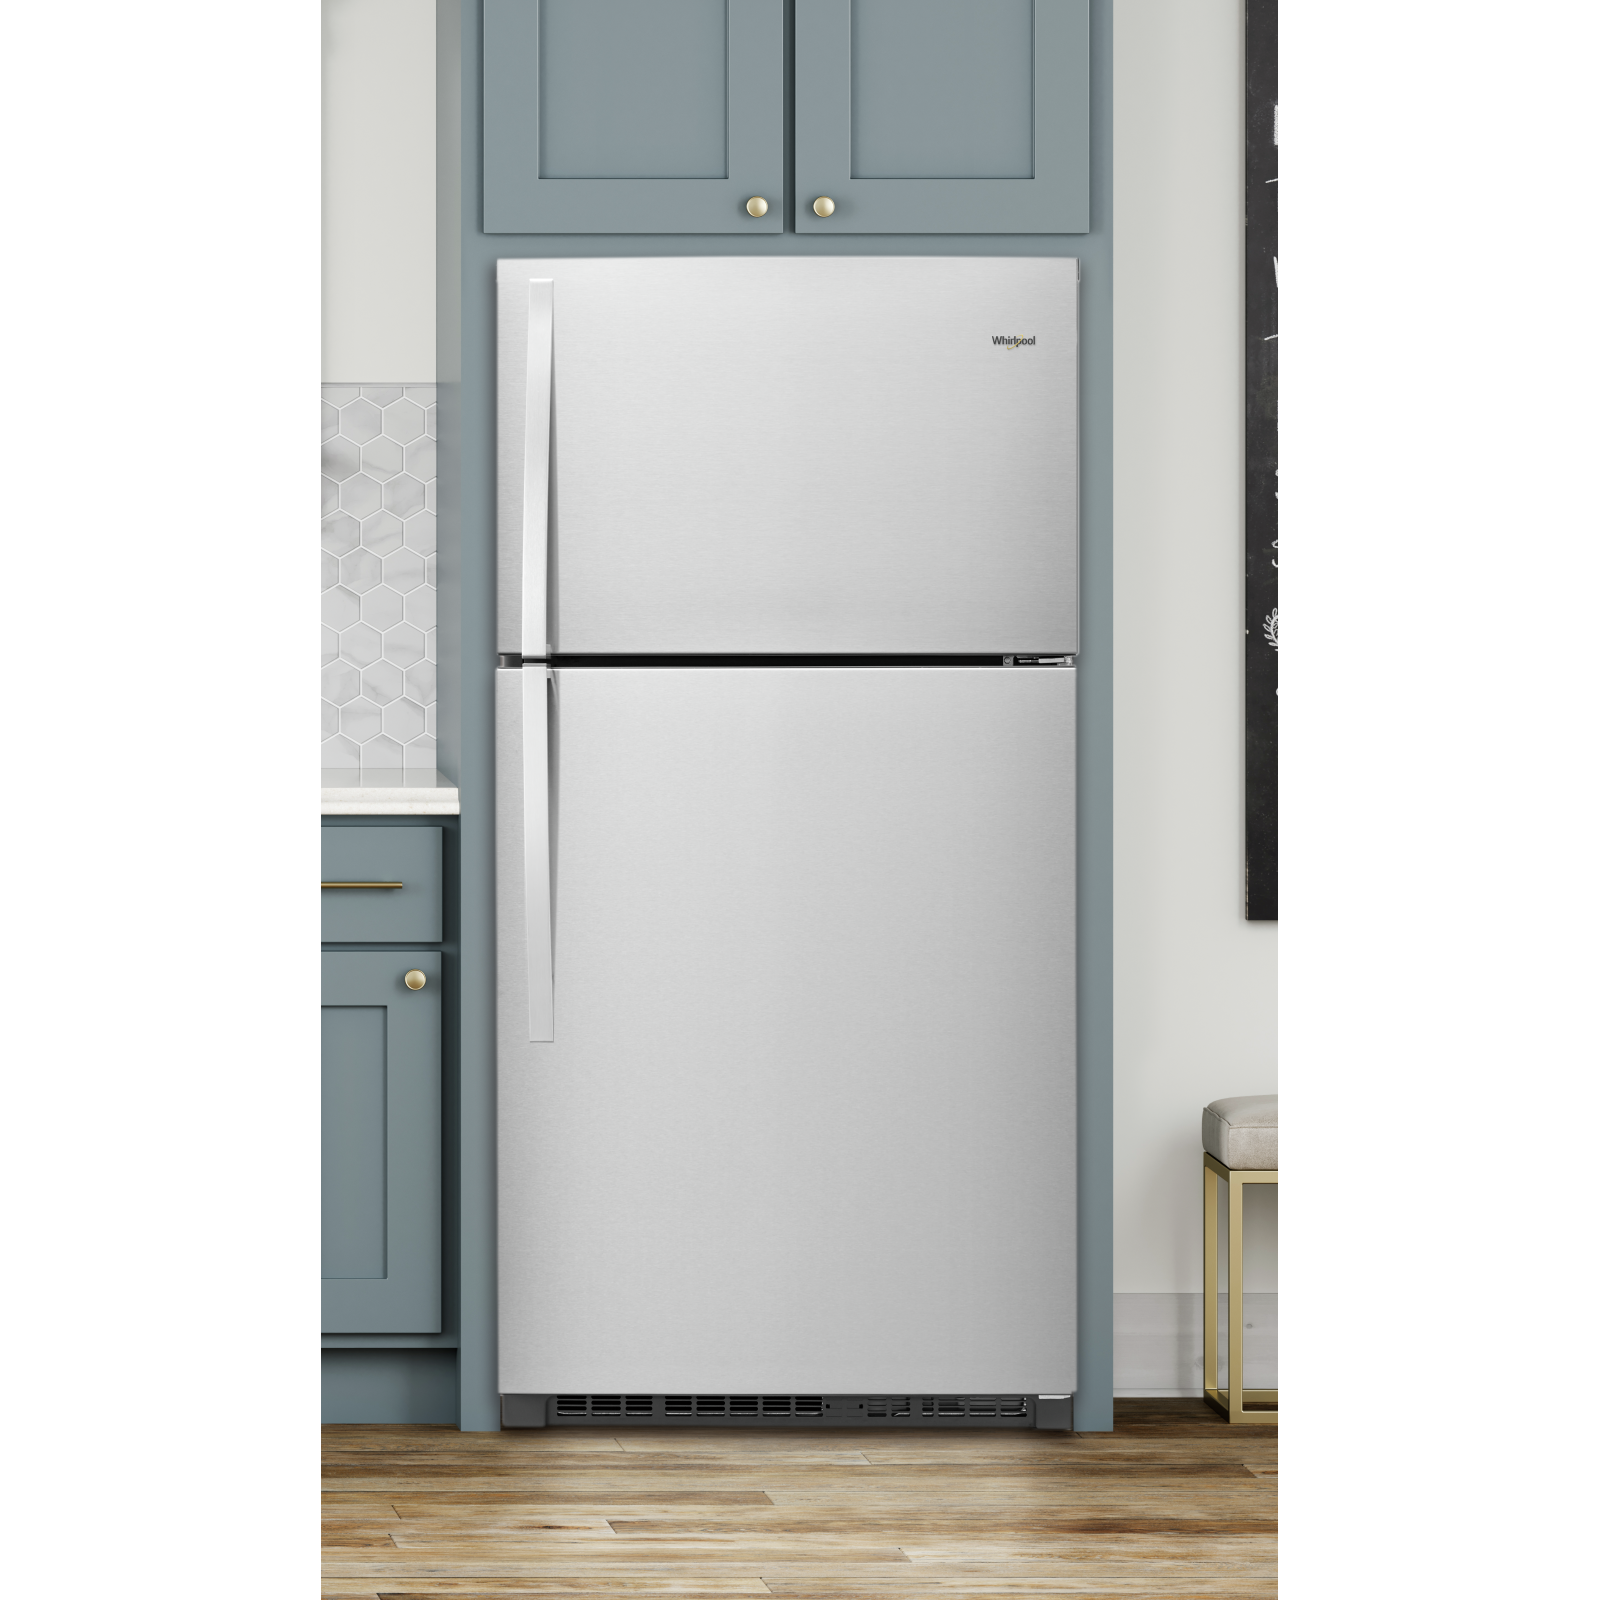 Whirlpool - 32.75 Inch 21.31 cu. ft Top Mount Refrigerator in Stainless - WRT541SZDZ